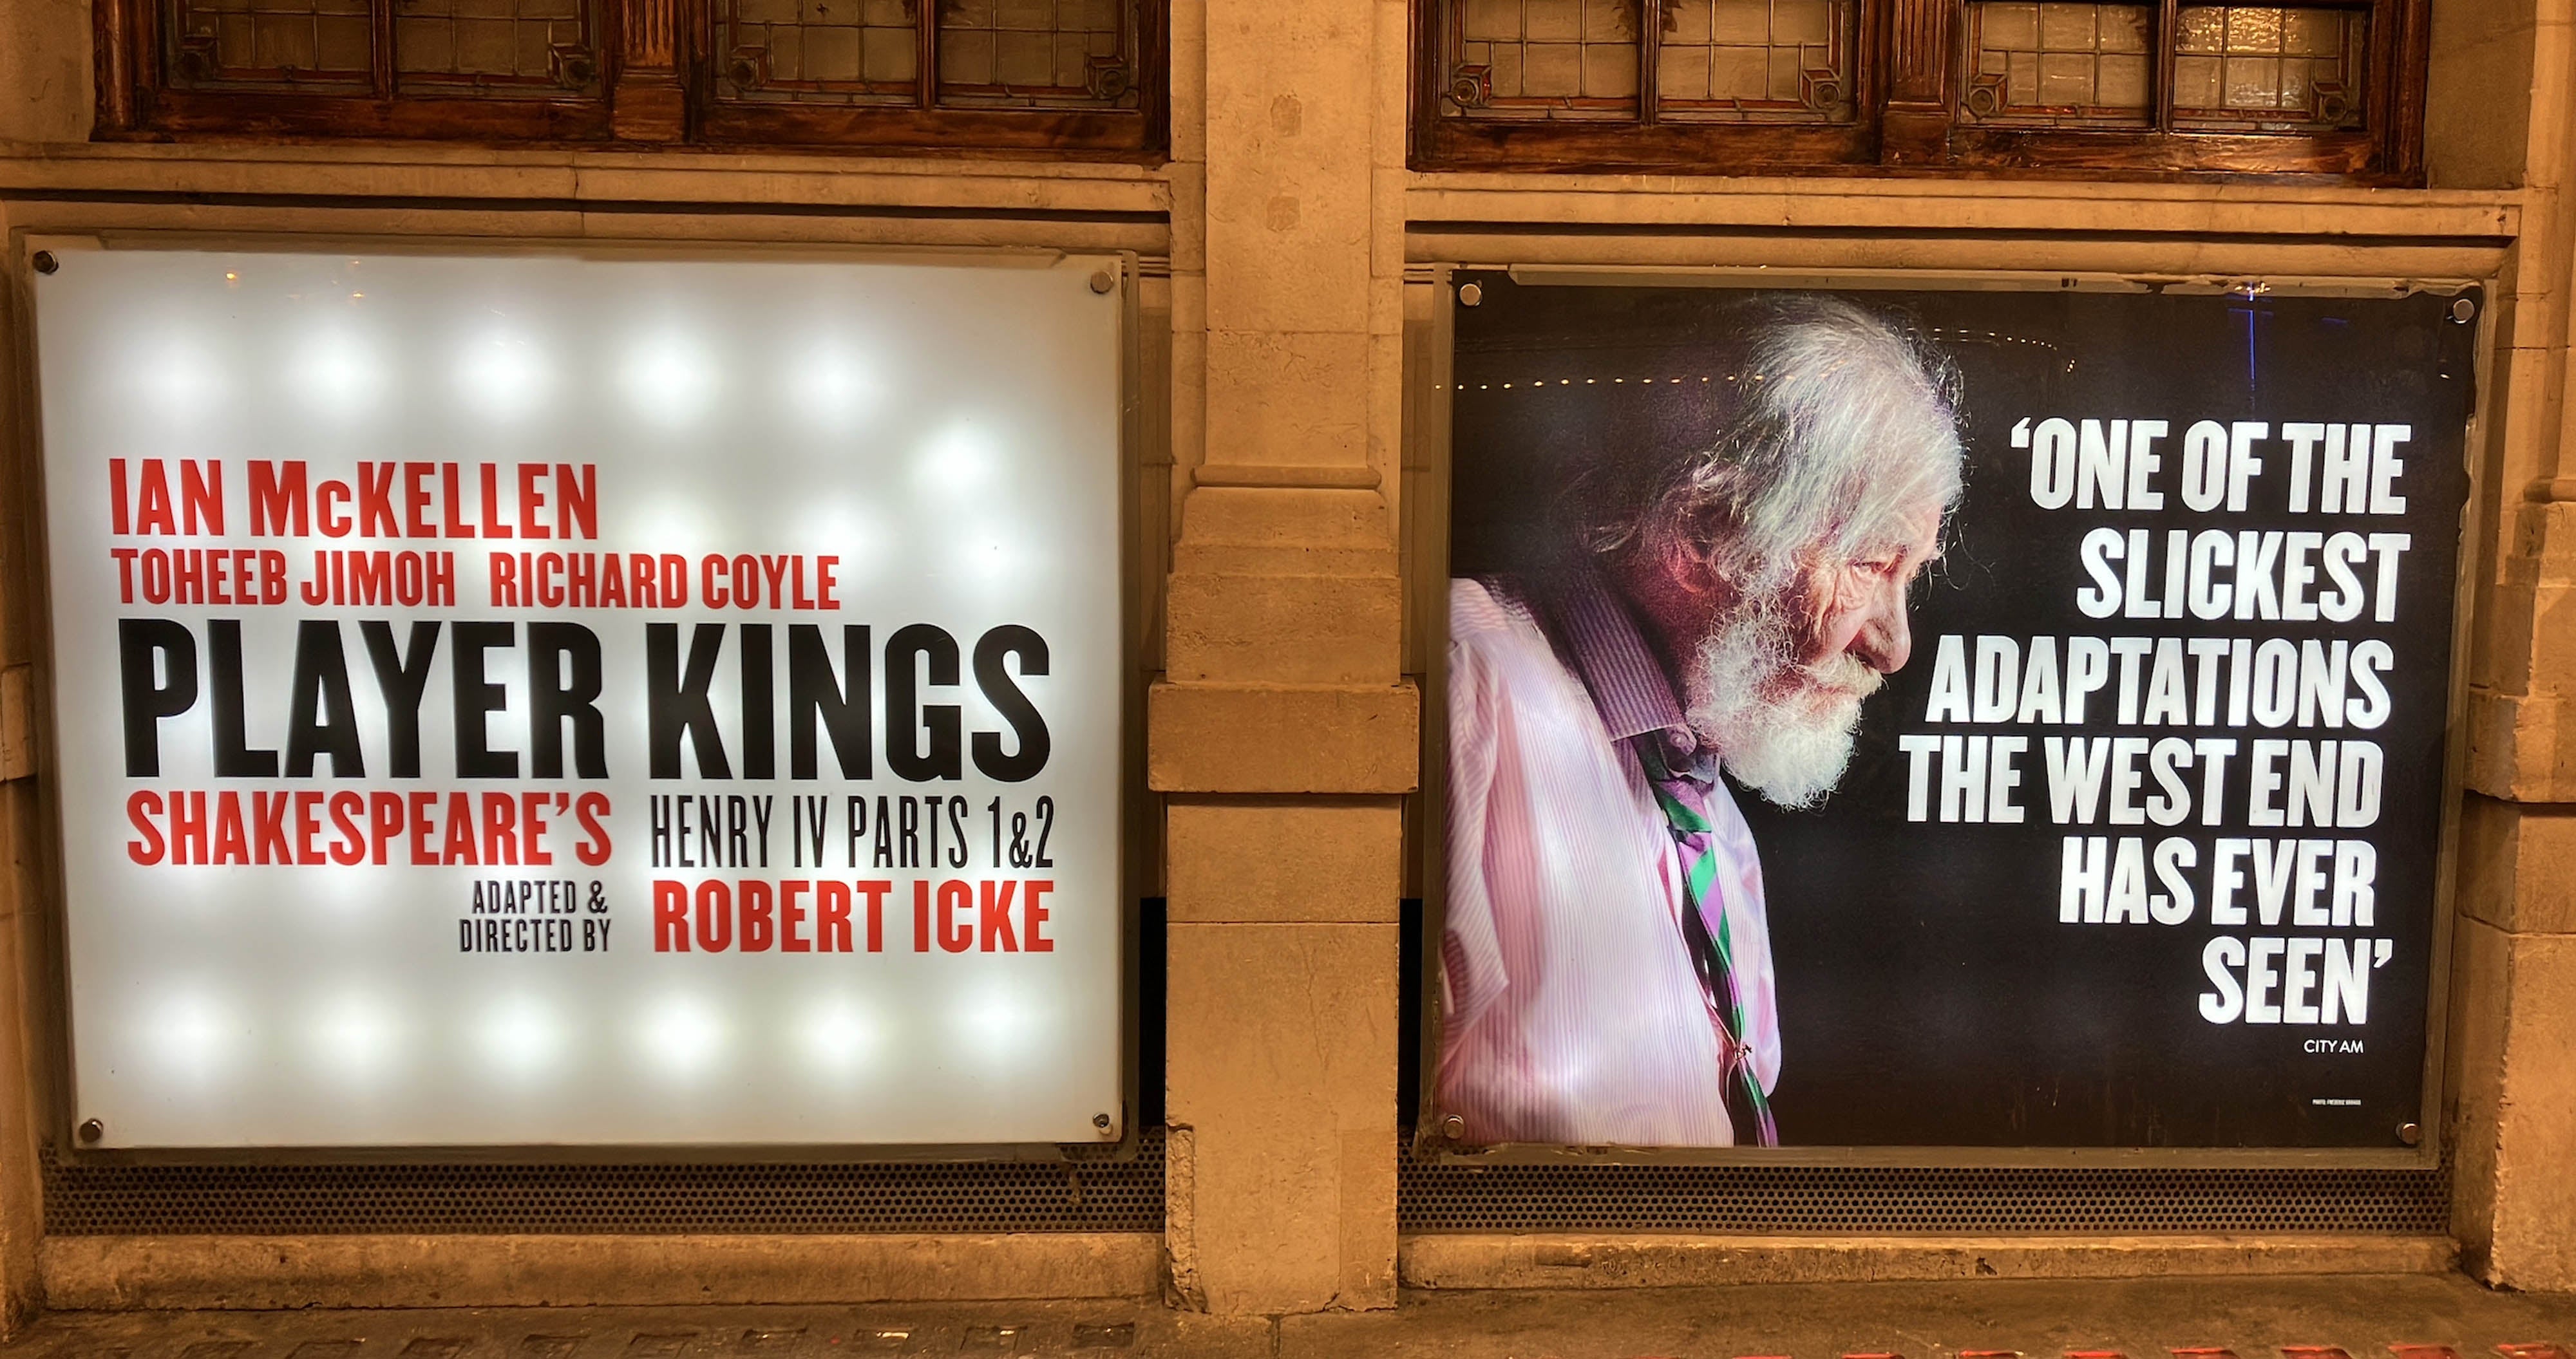 Sir Ian McKellen has been playing Falstaff in ‘Player Kings’ at the Noel Coward theatre since April